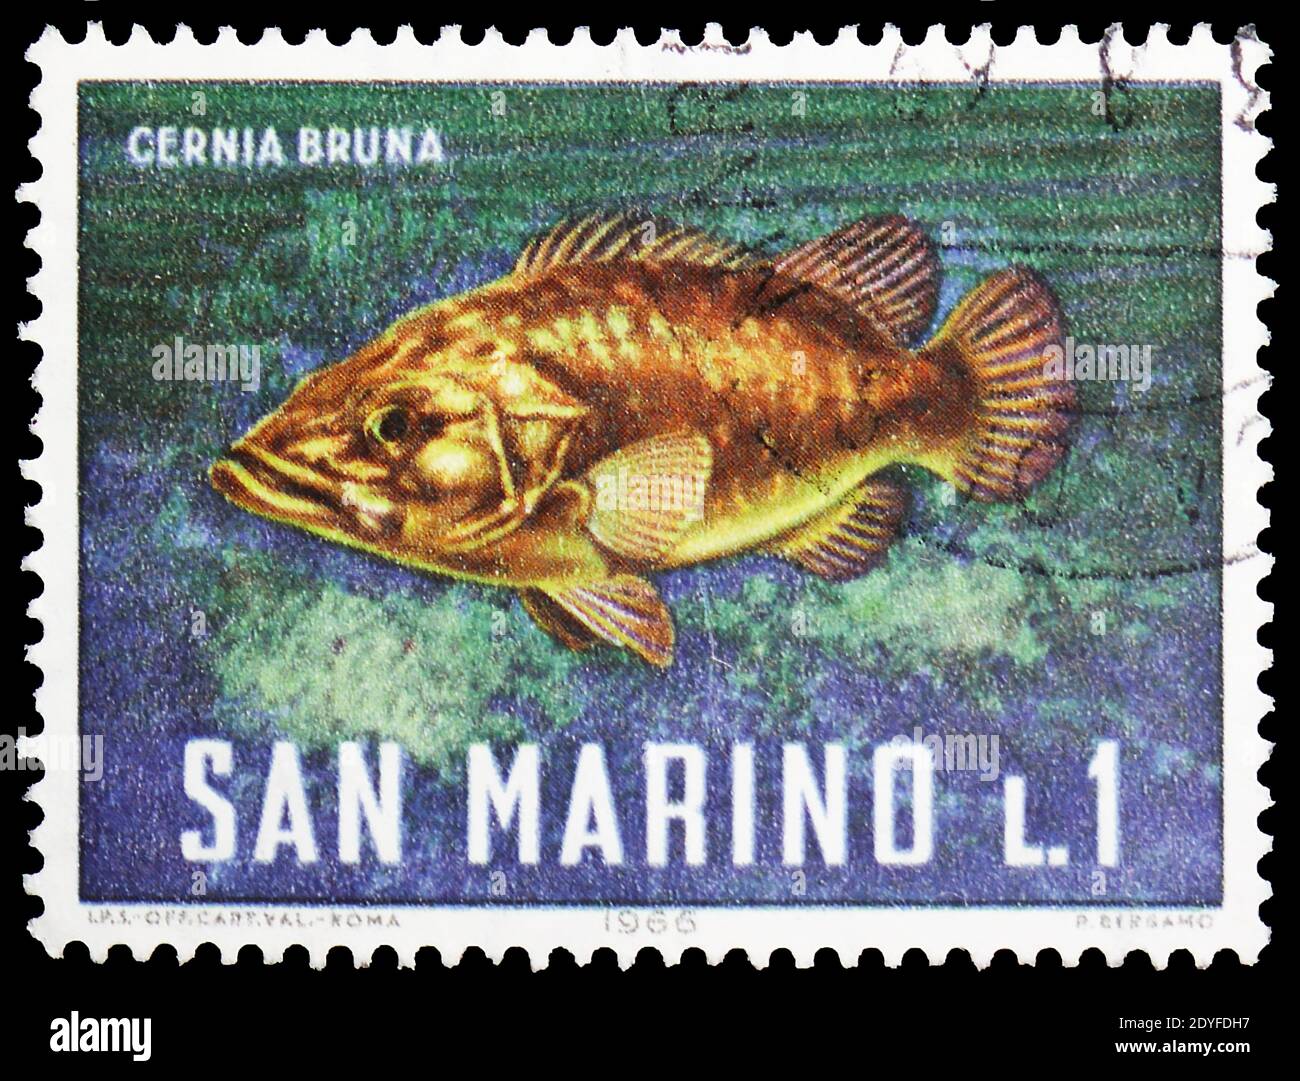 MOSCOW, RUSSIA - MAY 25, 2019: Postage stamp printed in San Marino shows Atlantic Wreckfish (Polyprion americanum), Marine Life serie, circa 1966 Stock Photo